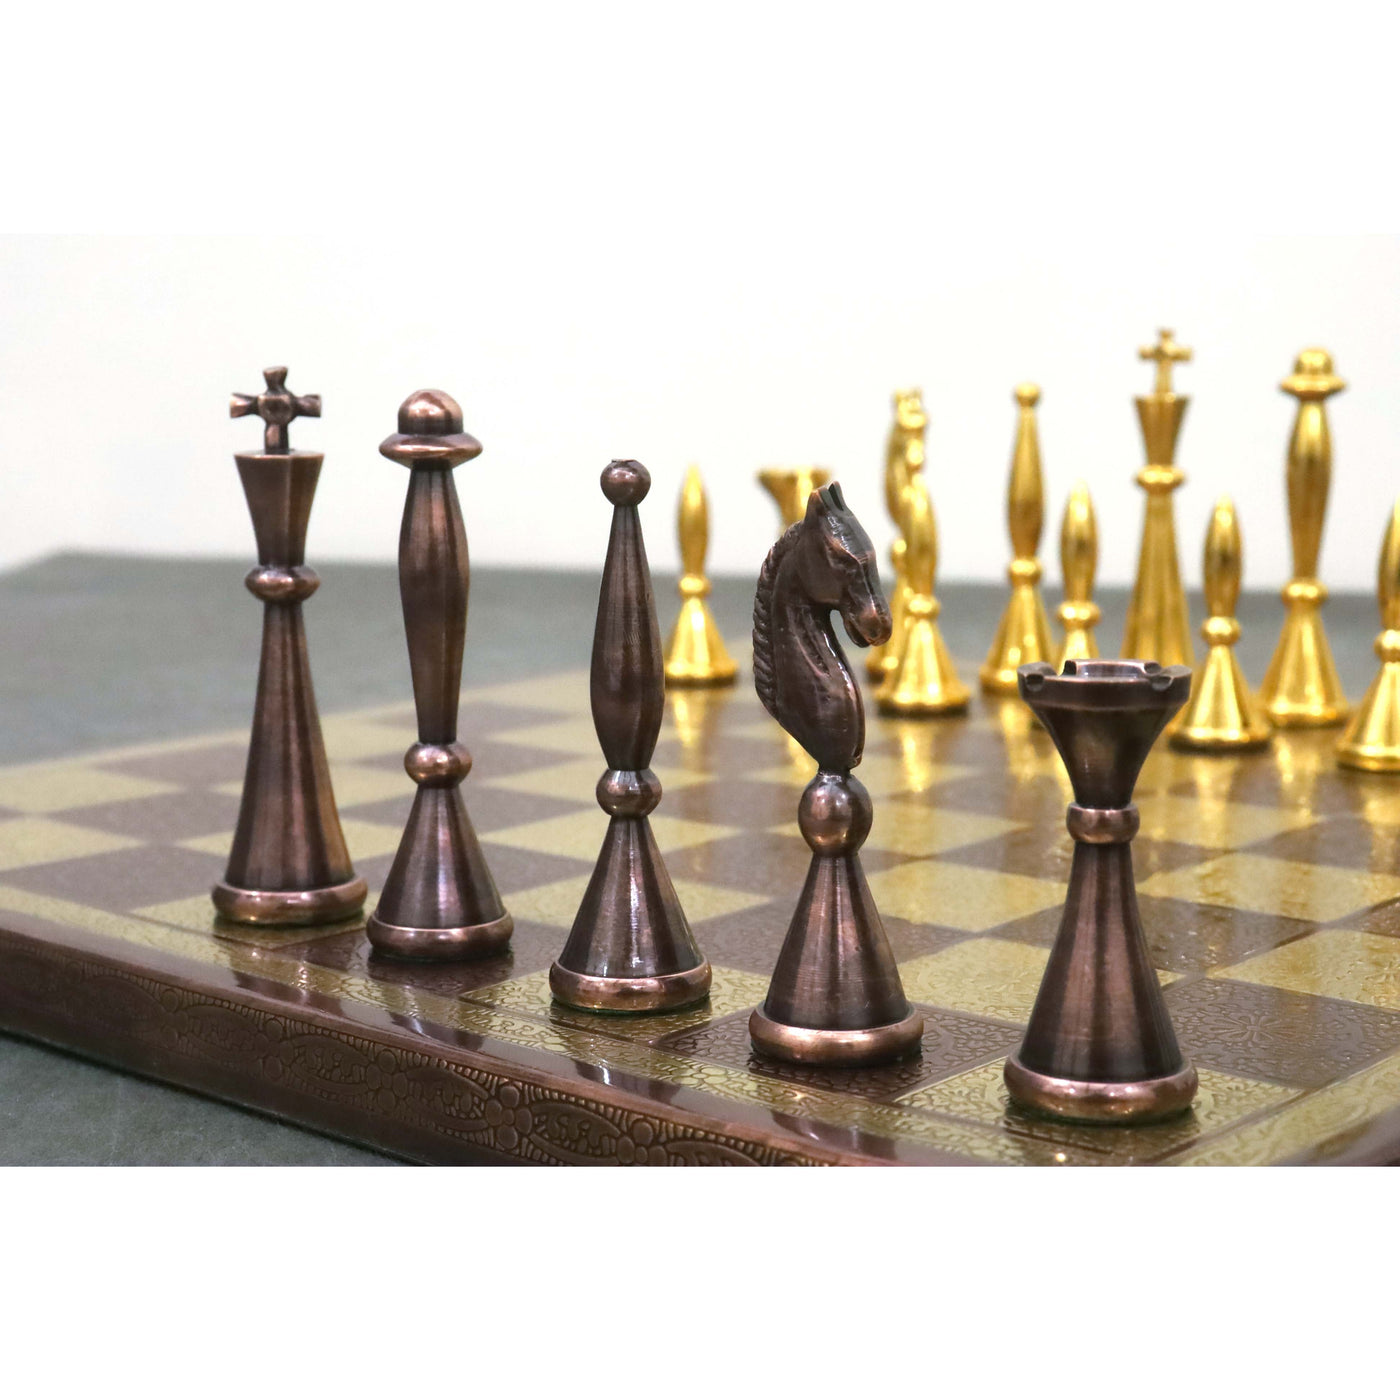 Luxury Chess Pieces & Board Set | Luxury Chess Pieces | Wood Chess Sets